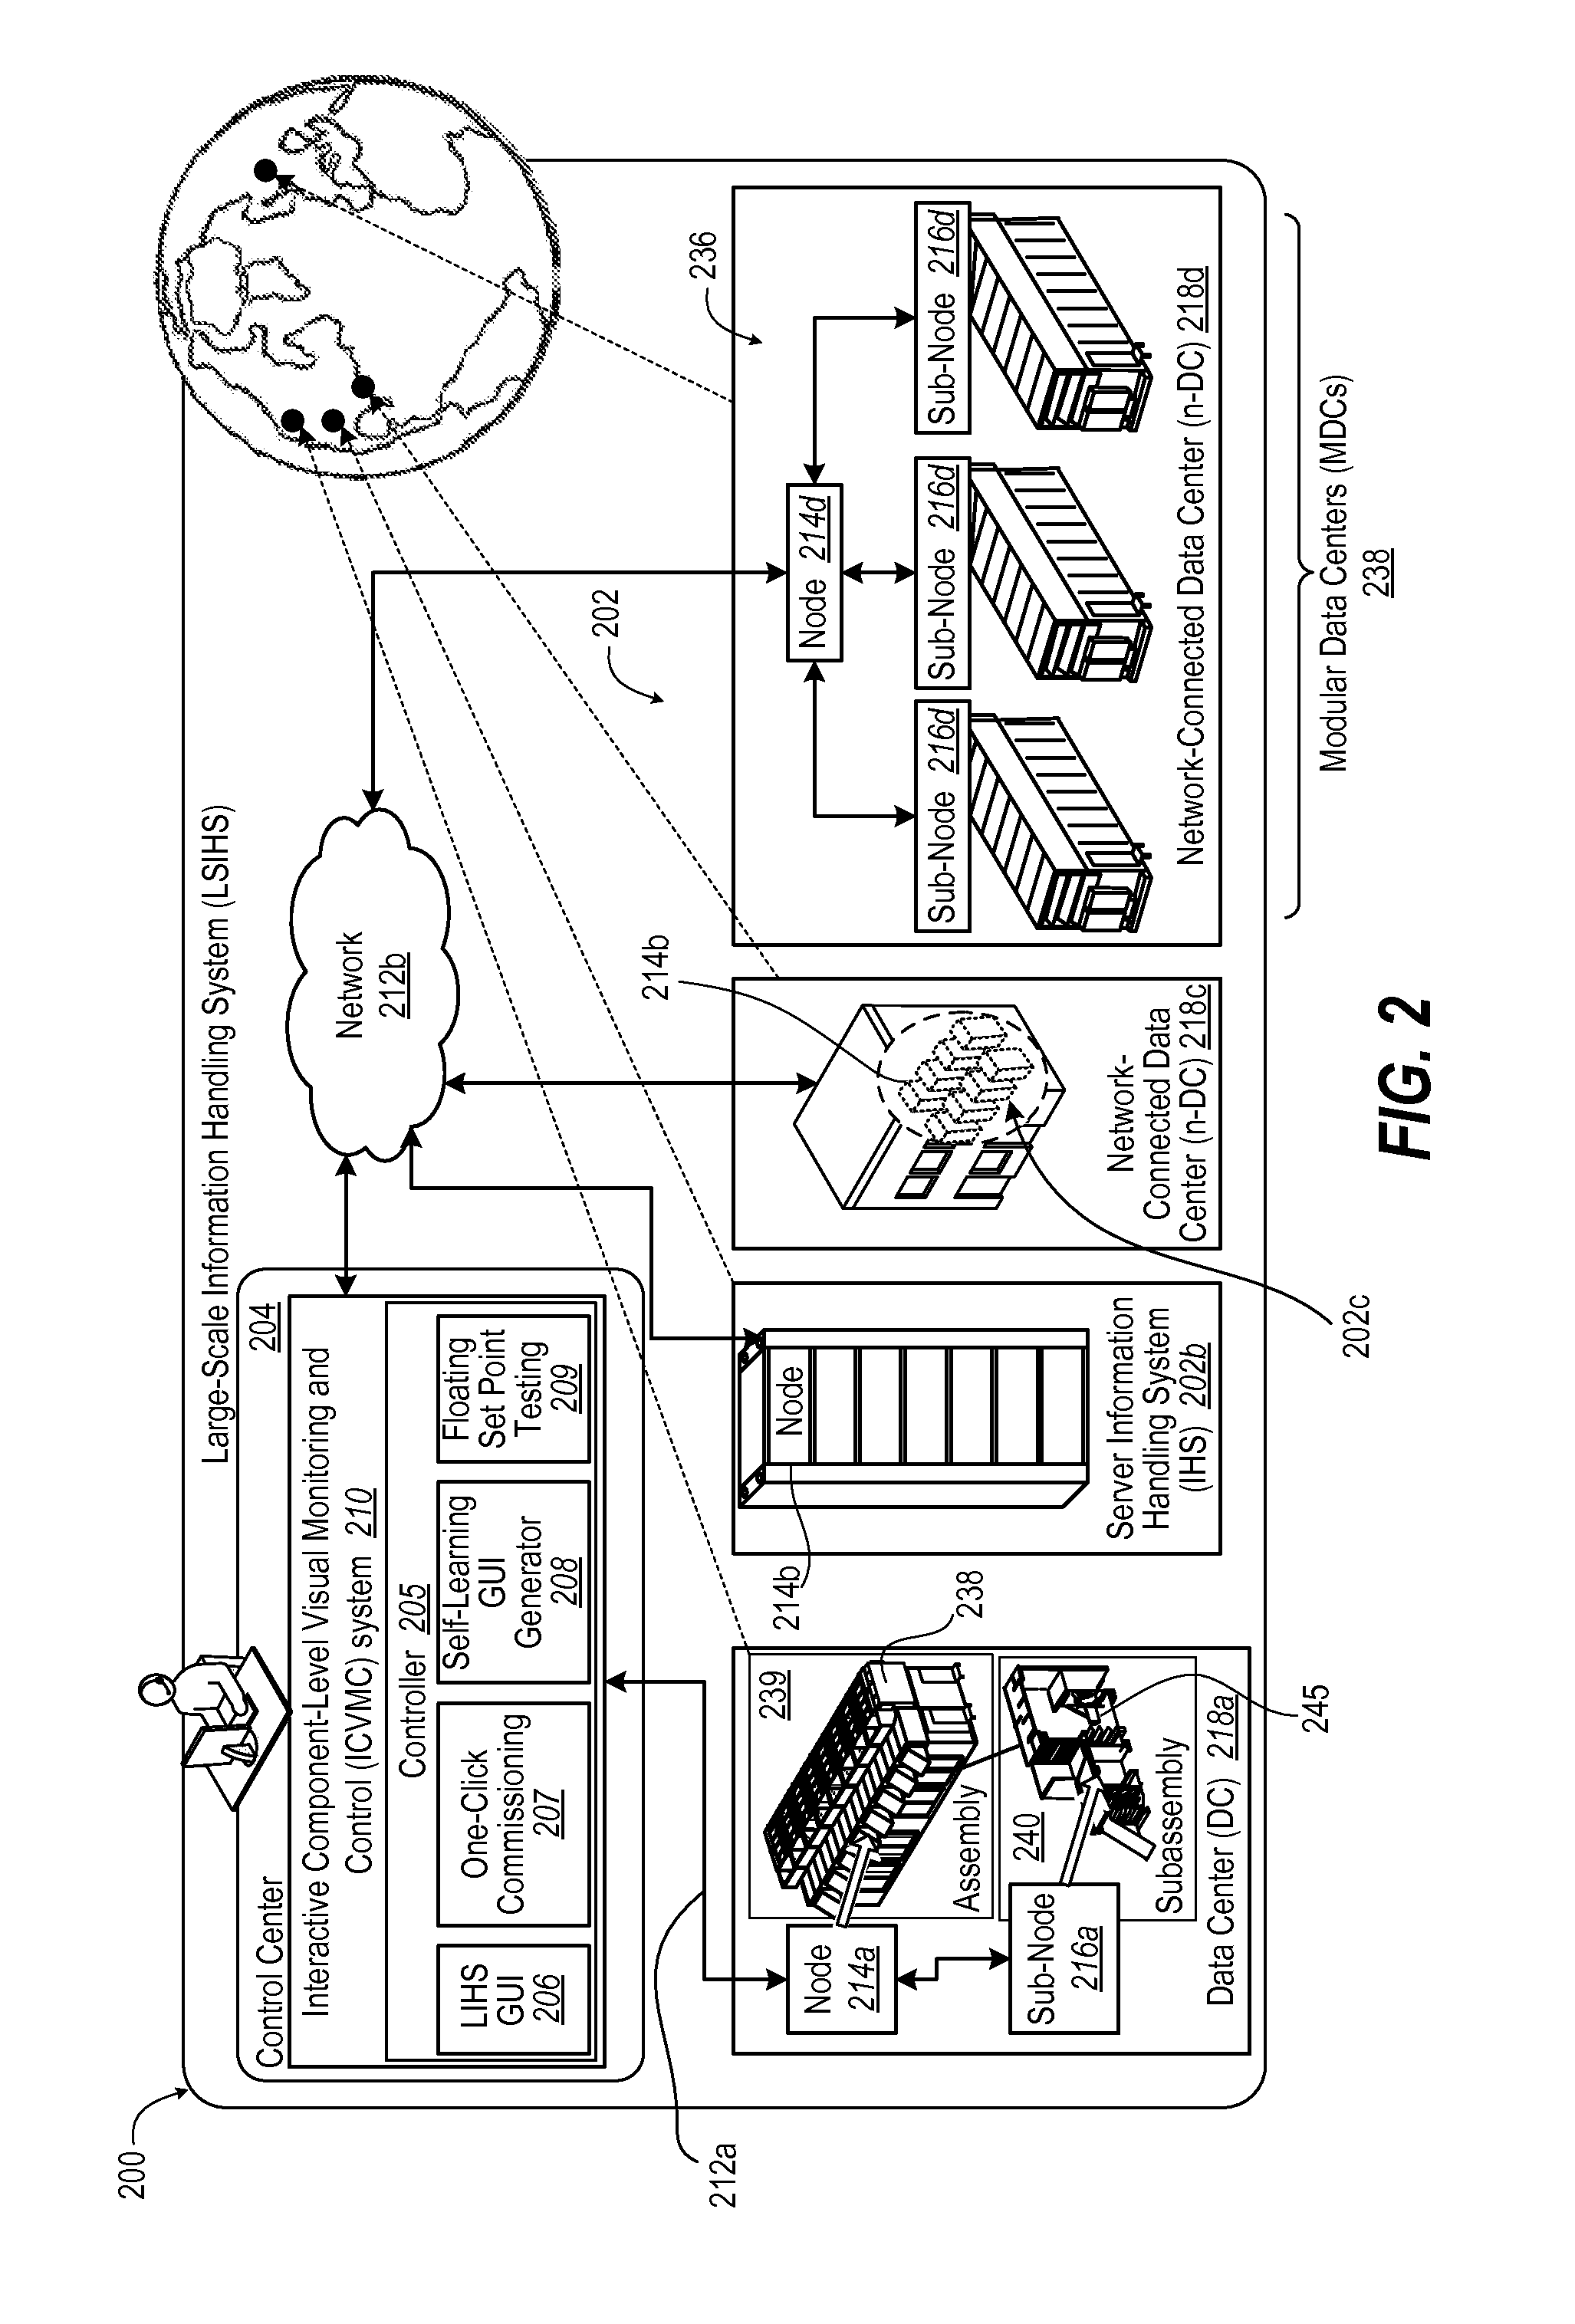 Method and information handling system providing an interactive interface for device-level monitoring and servicing of data center